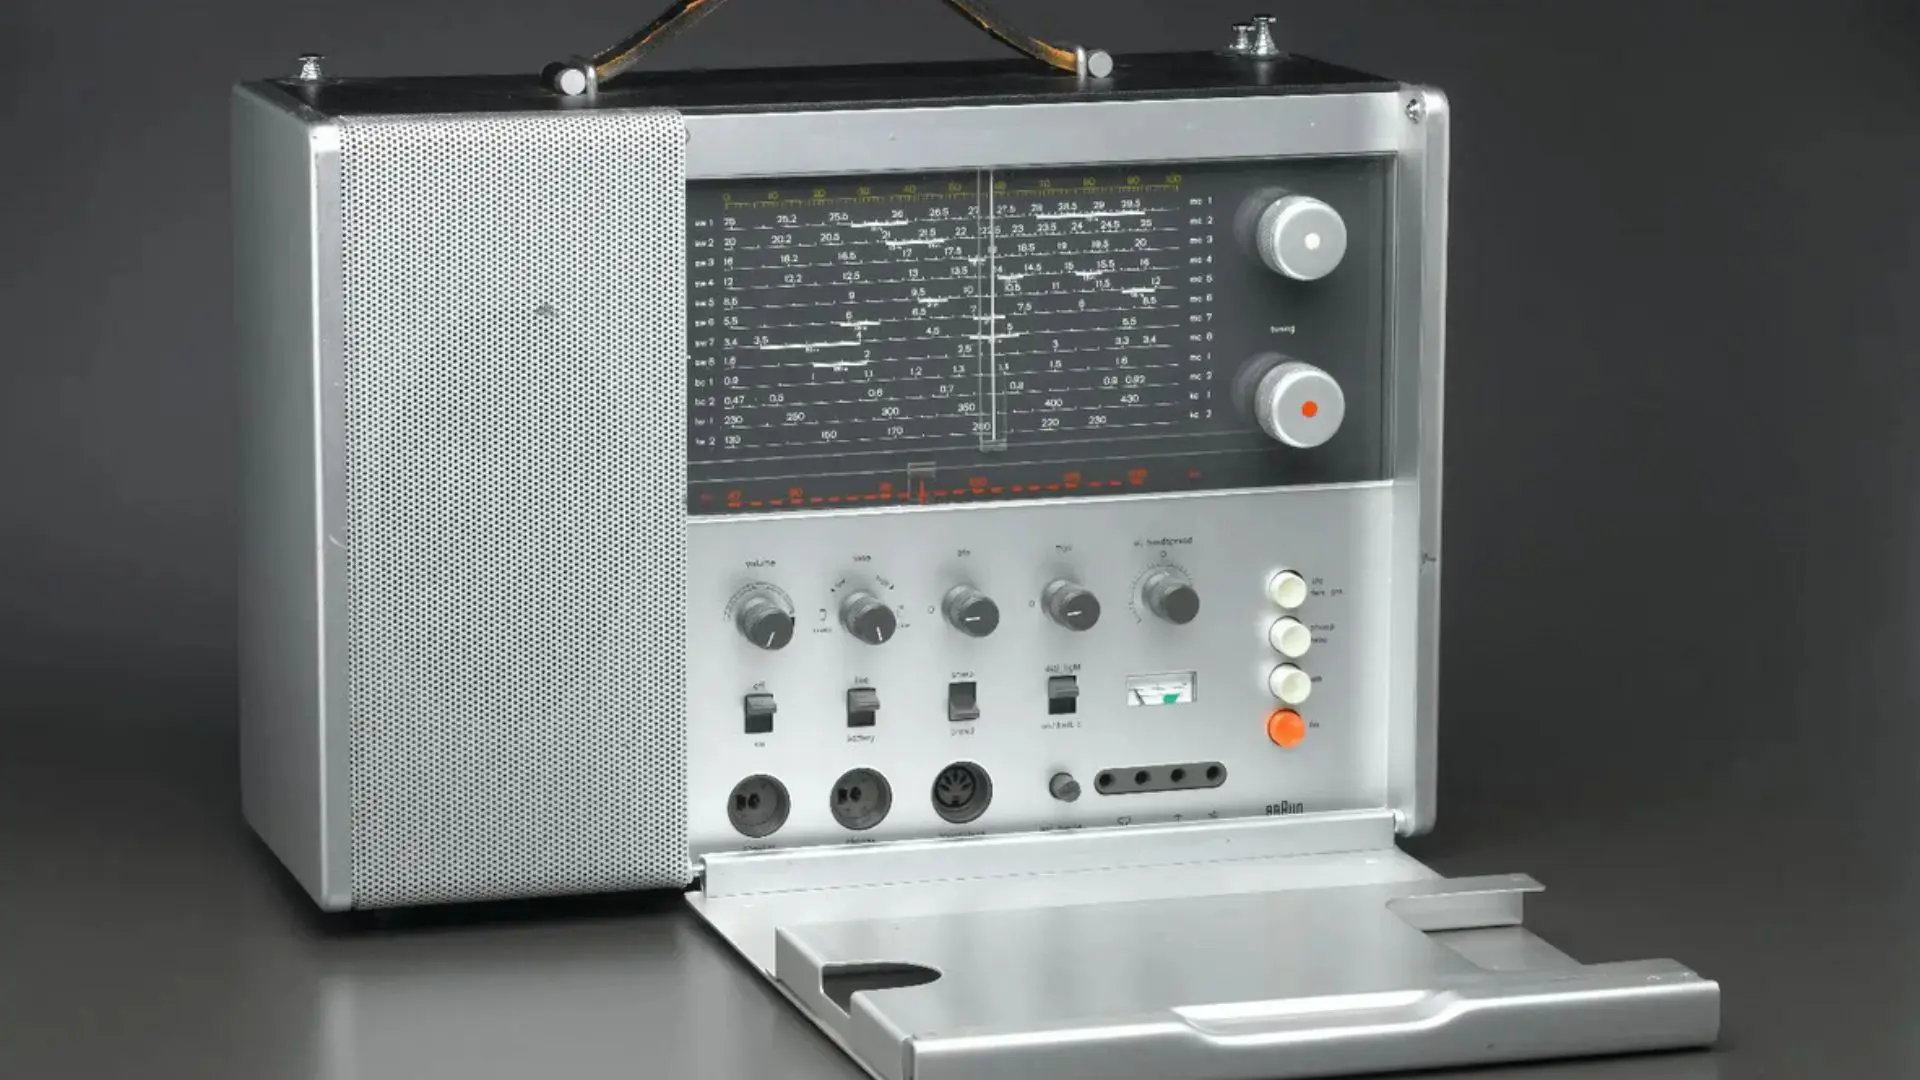 T1000 world receiver _ 10 best Dieter Rams designs - Cover